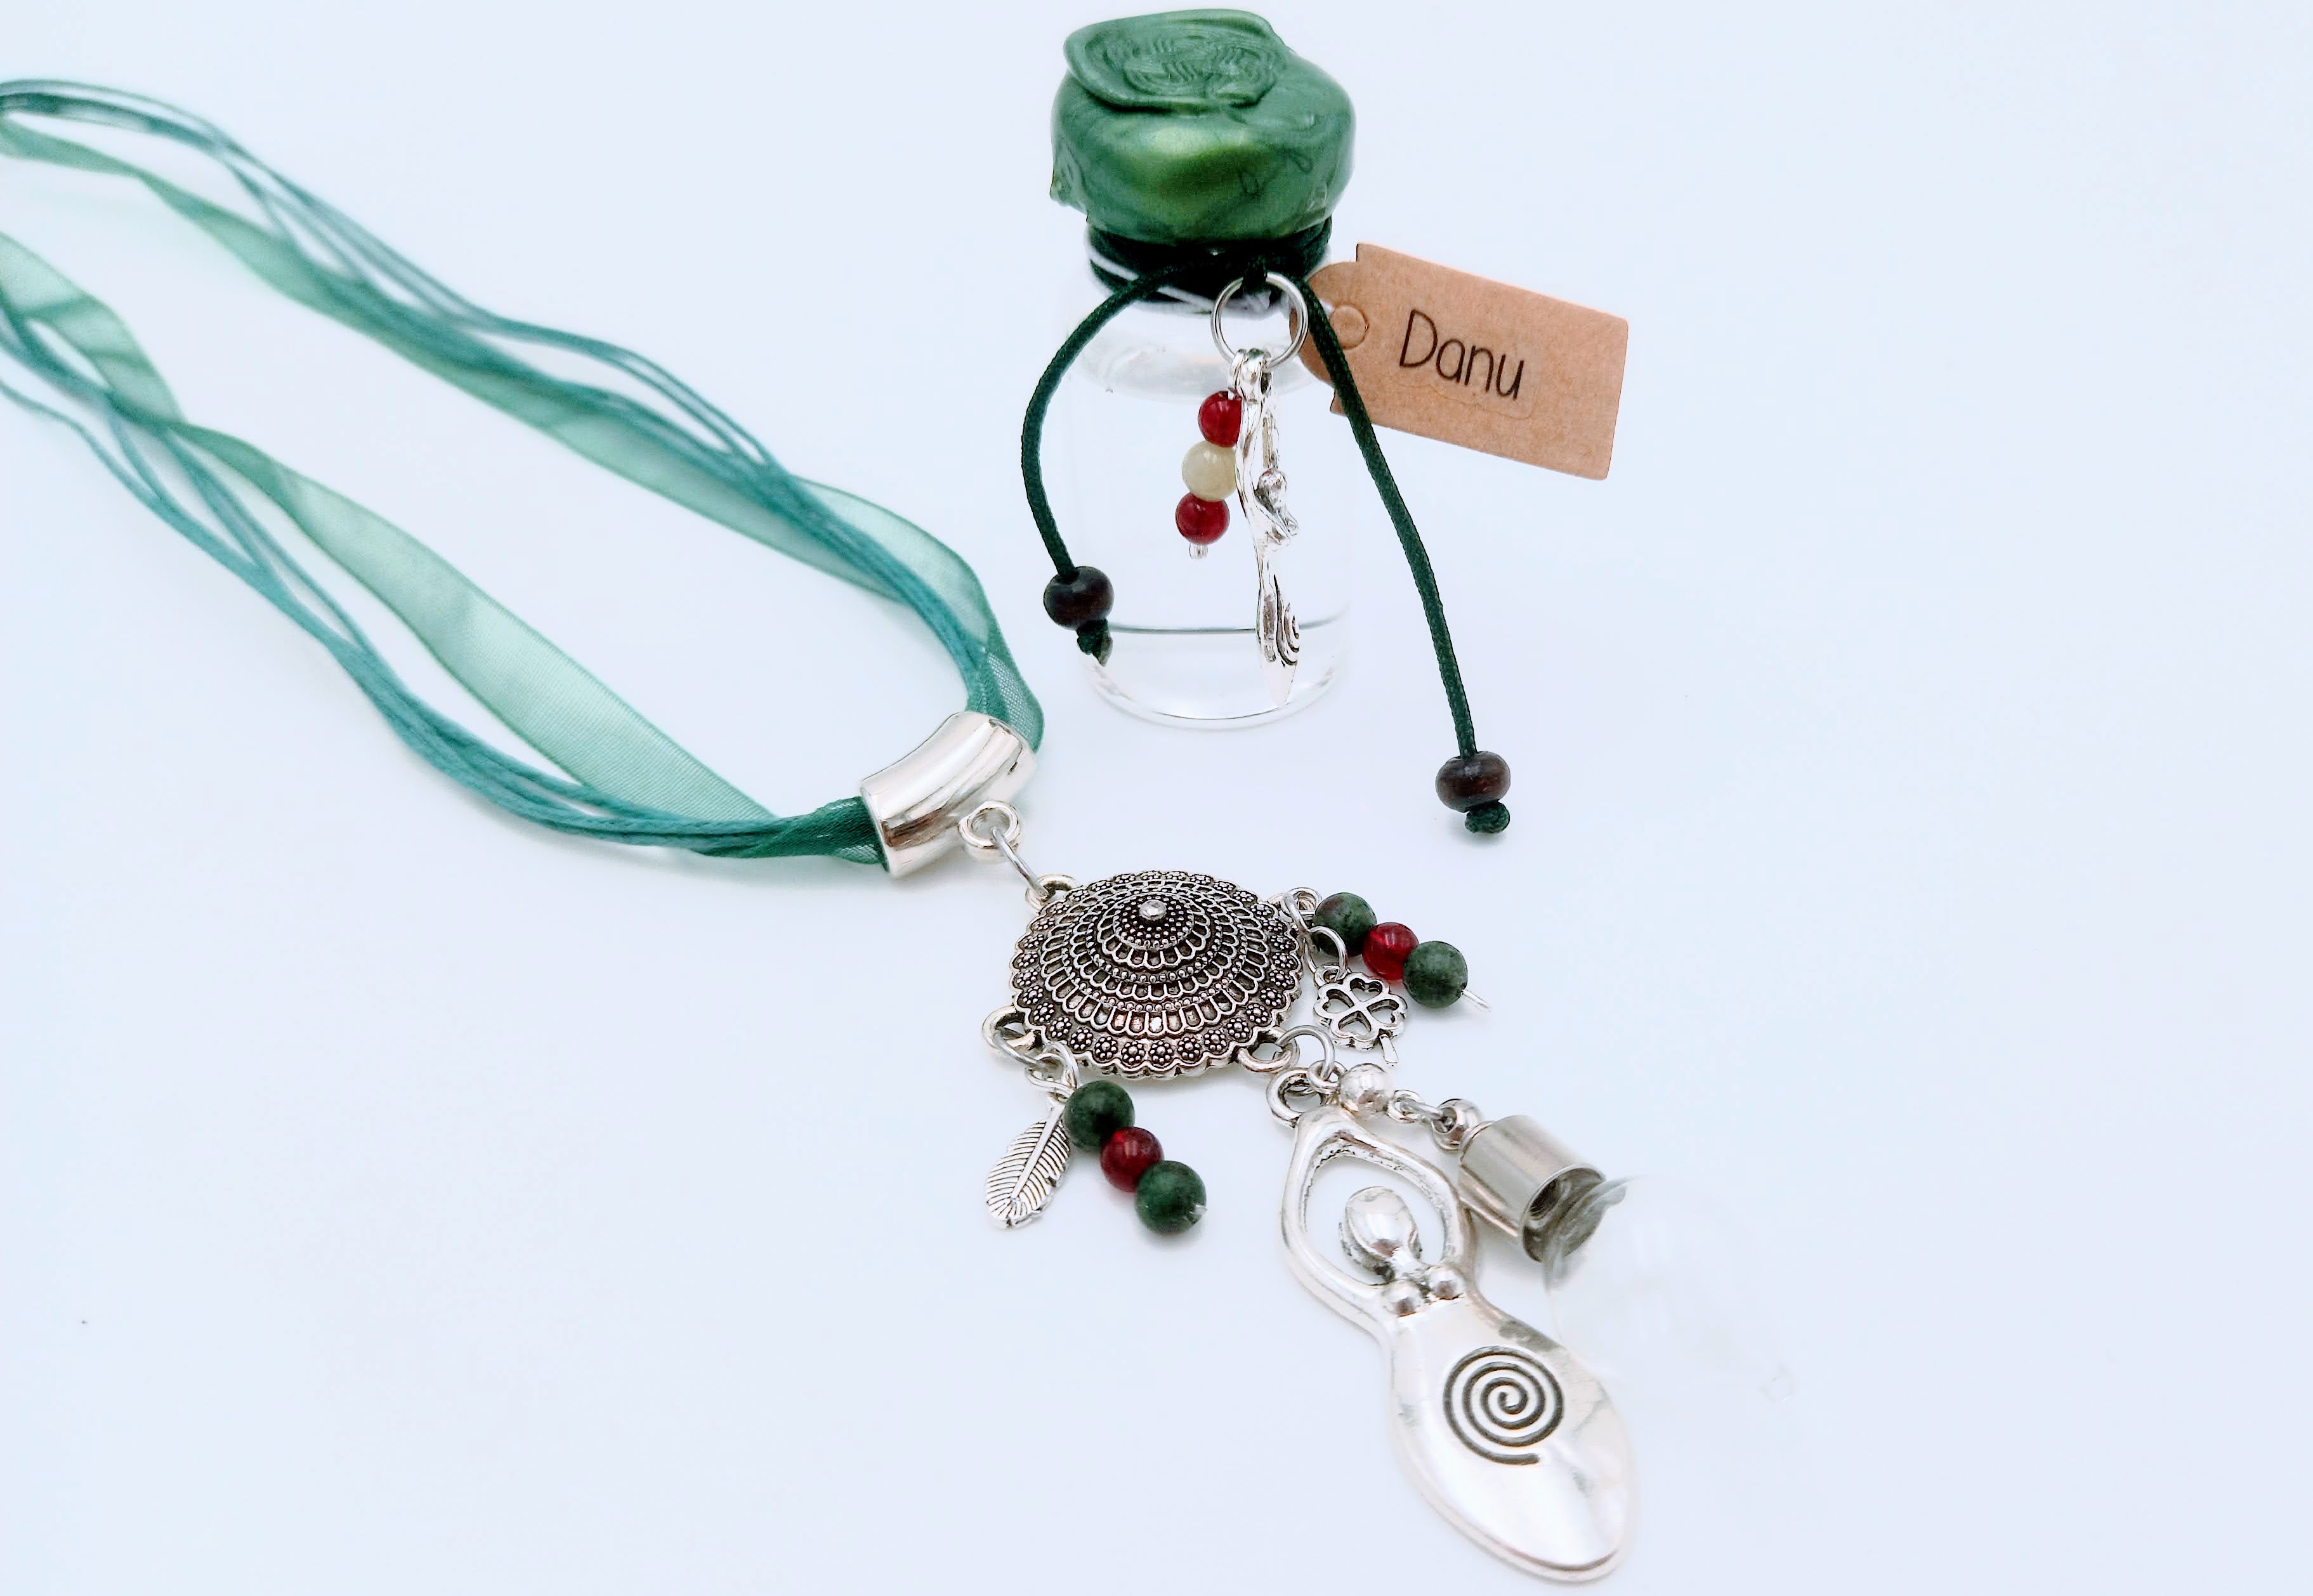 * Danu Goddess Mother - Charmed Pendant filled with St.Brigid Well Water from an Irish Holy Well.